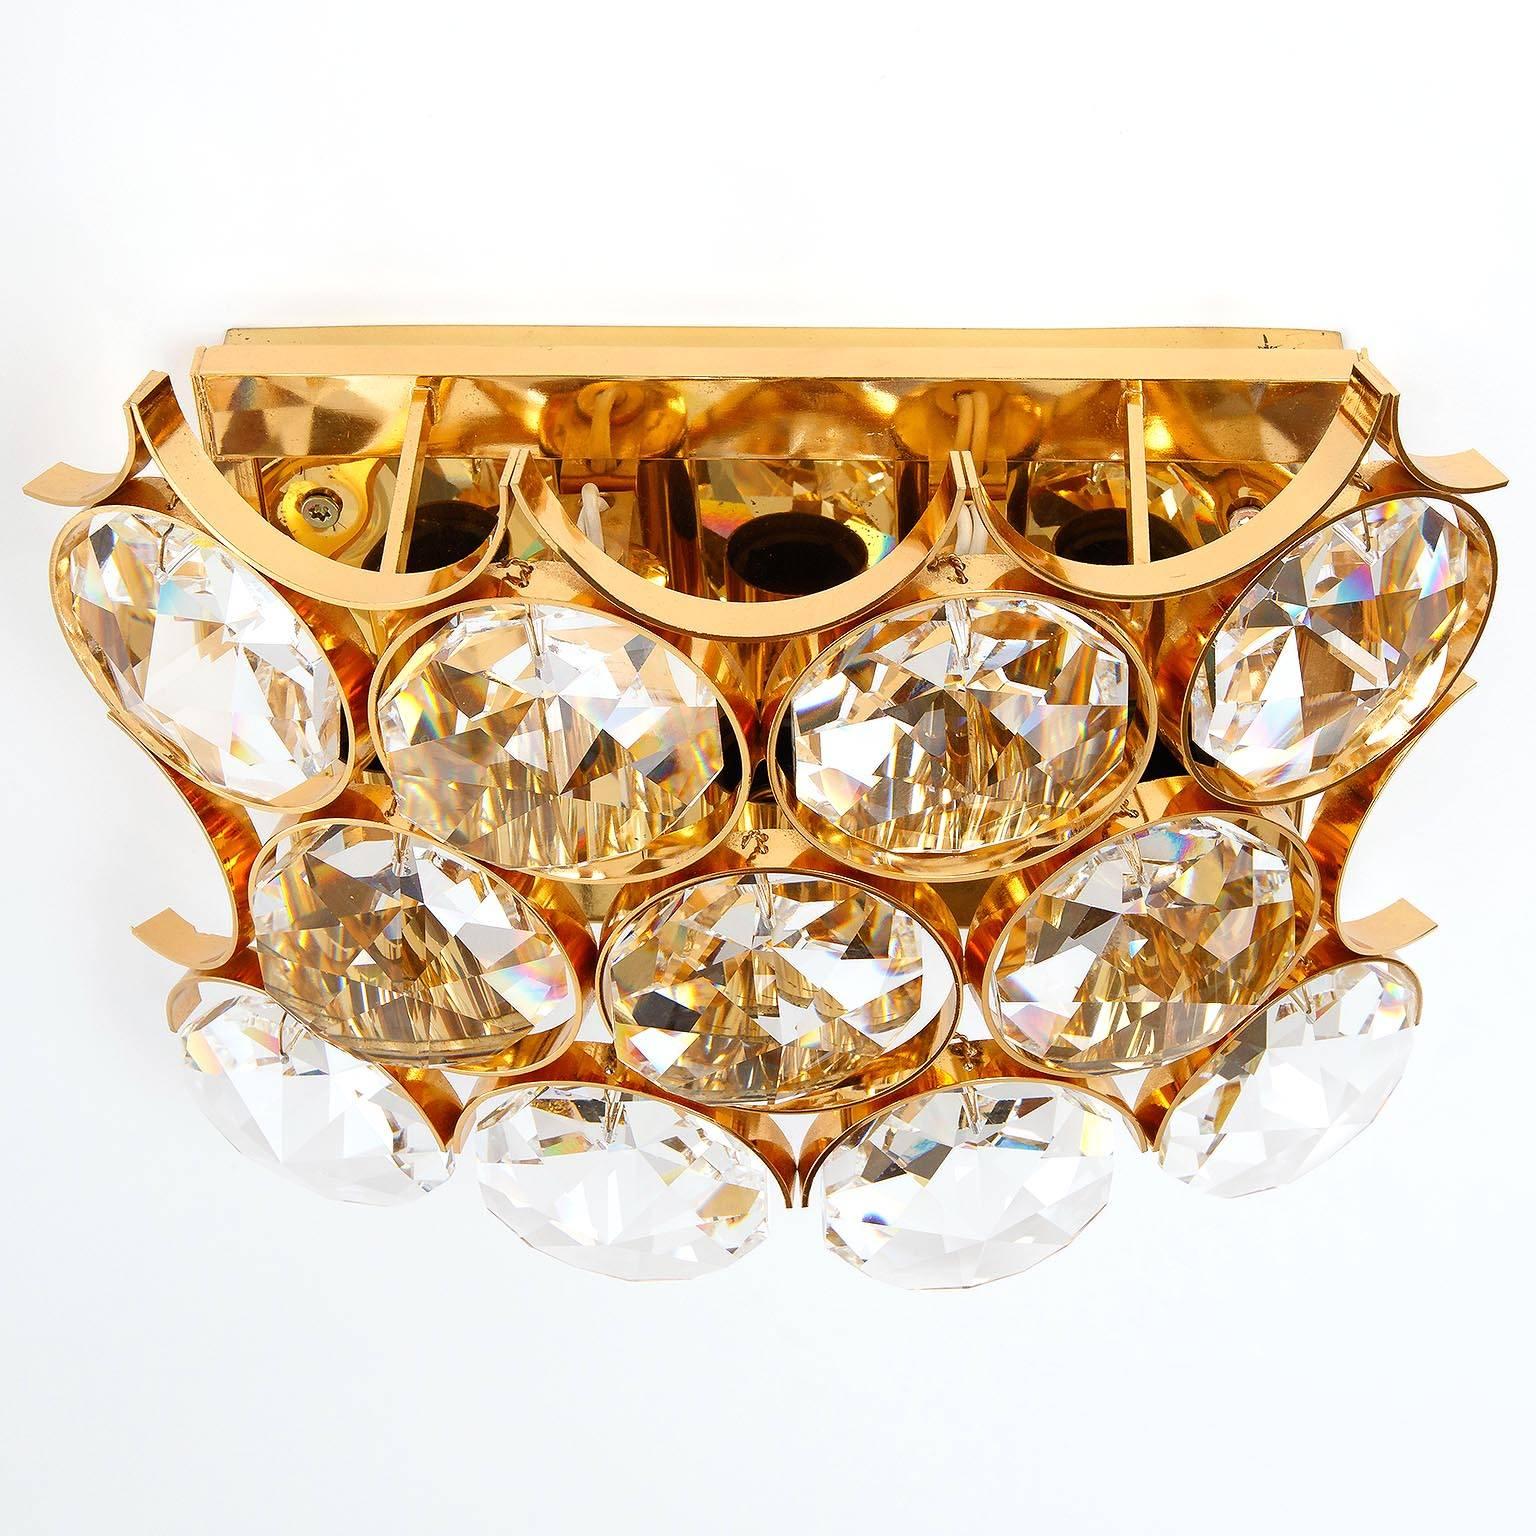 Hollywood Regency Pair of Palwa Sconces Wall Lights, Gilt Brass and Crystal Glass, 1970 For Sale